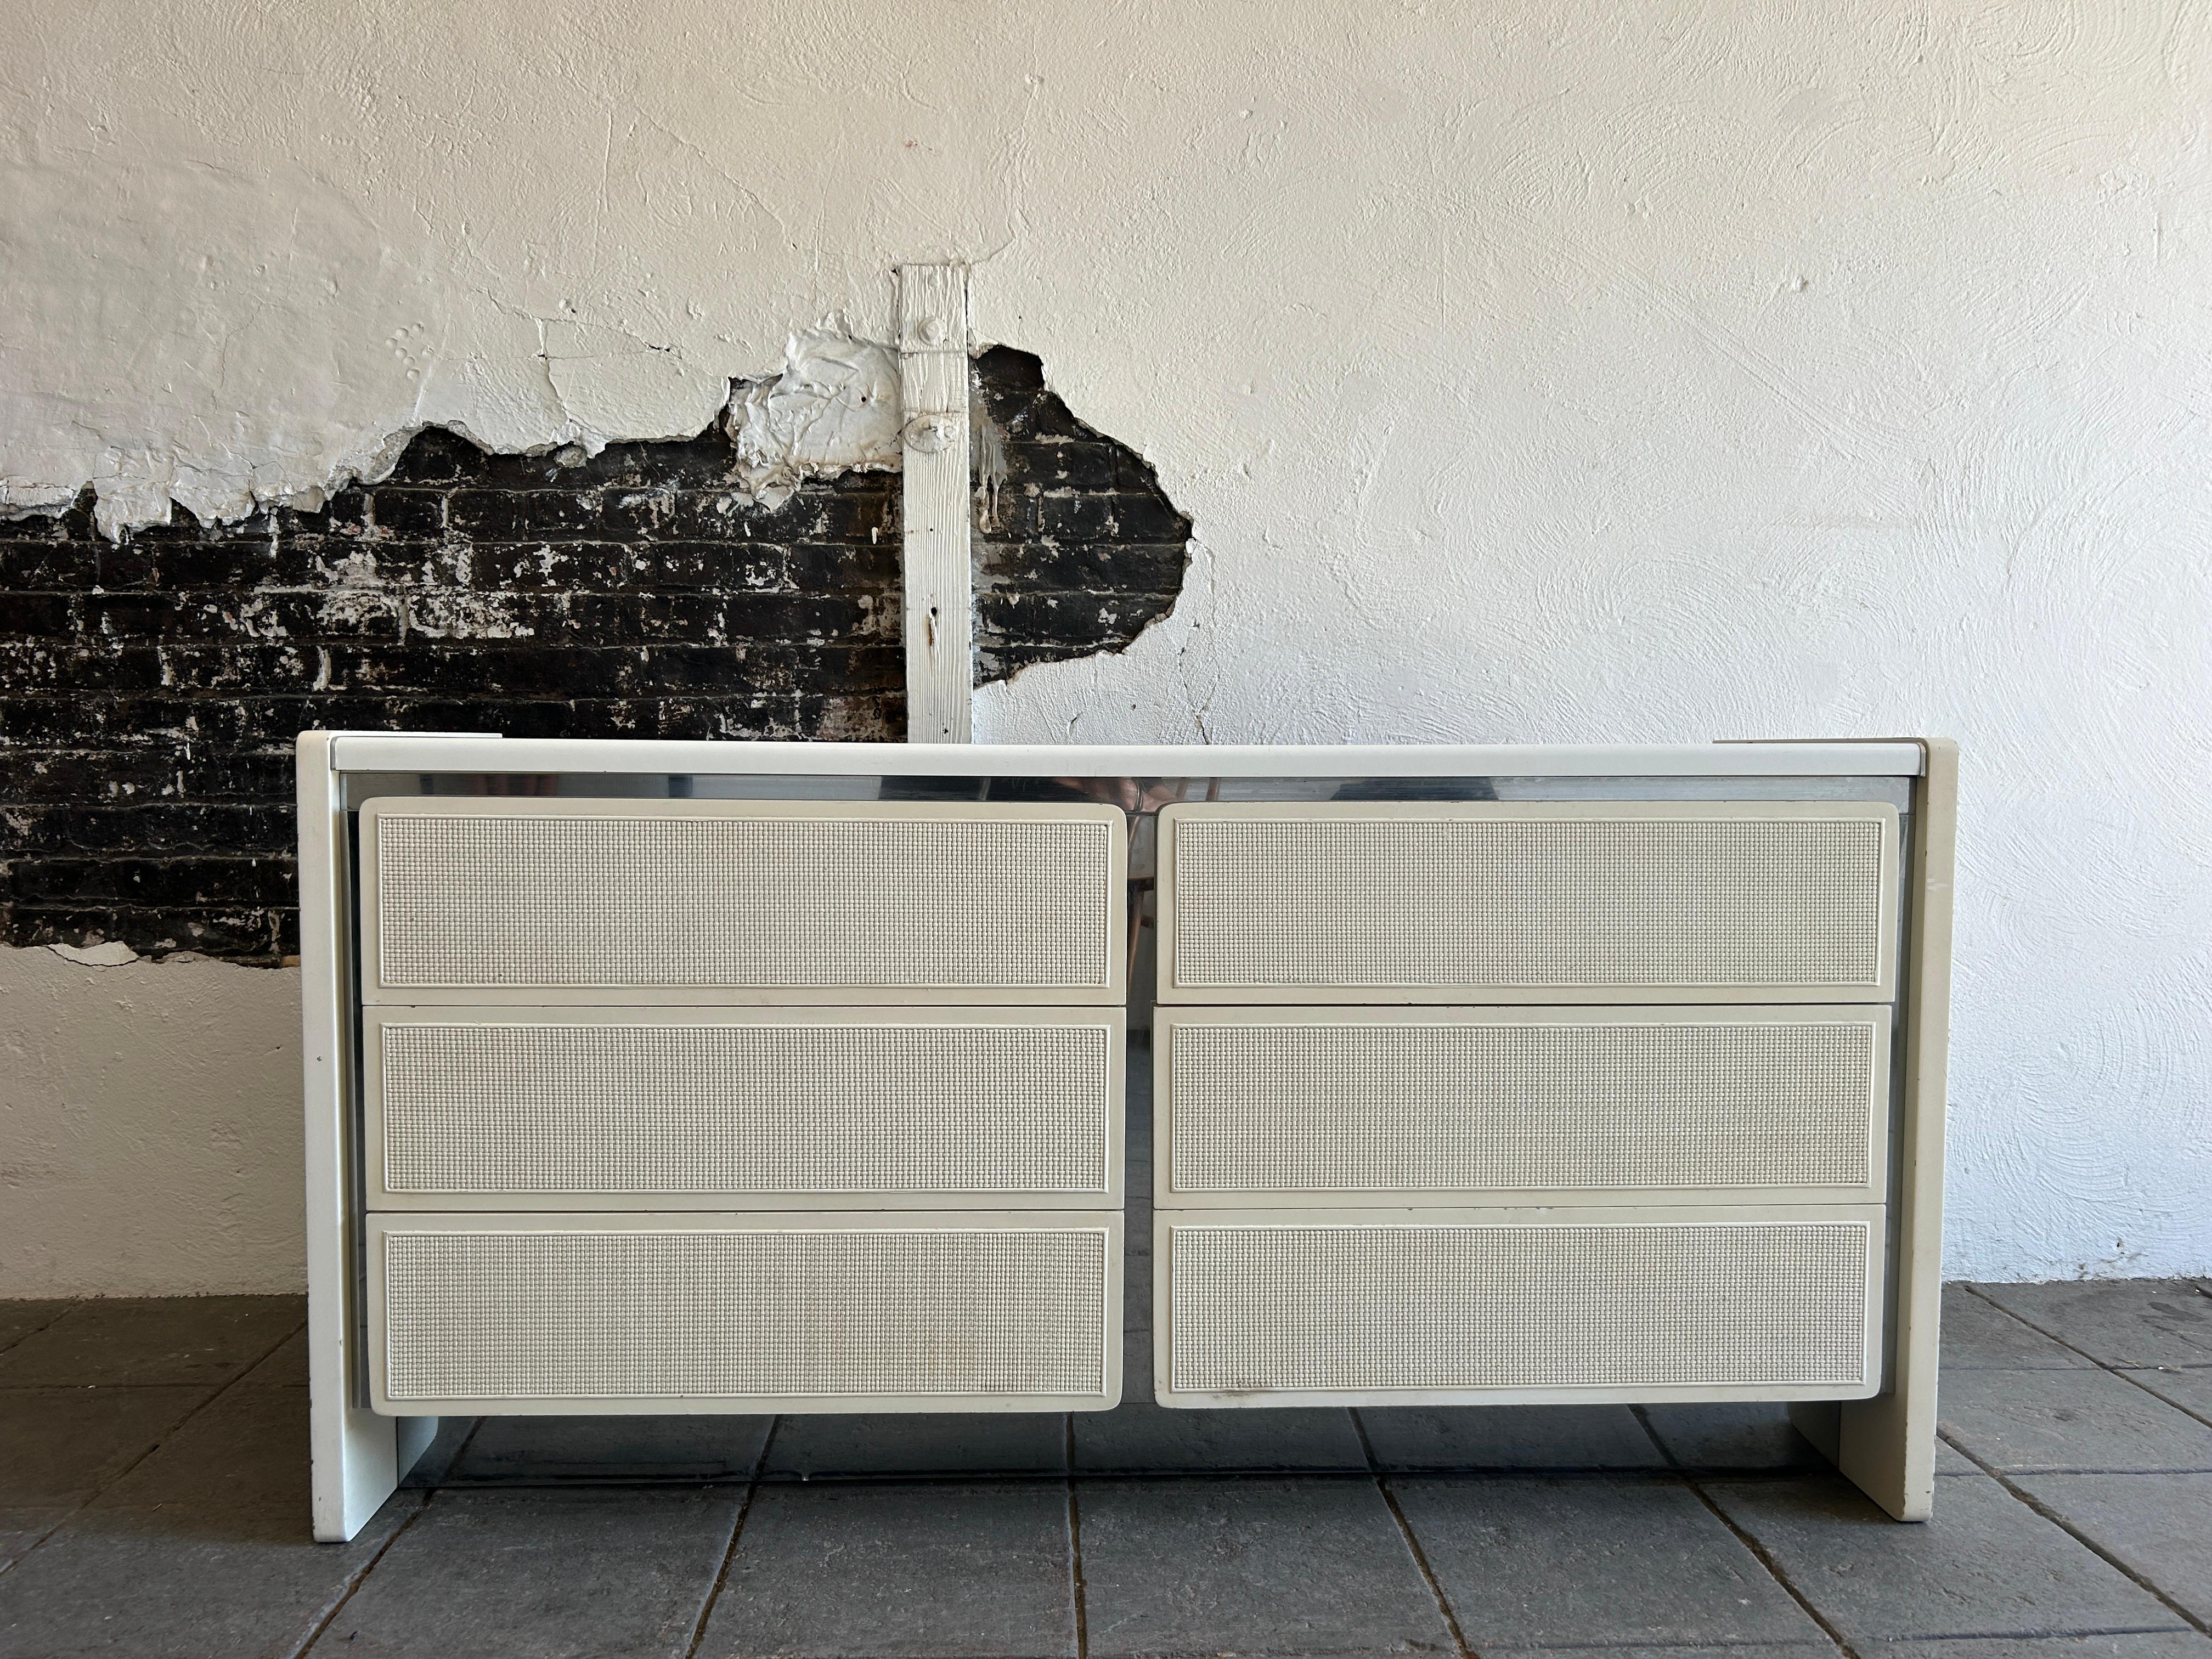 Post modern white cane chrome 6 drawer dresser credenza. White lacquer top with cream lacquer cane drawer fronts and sides. Has chrome accents behind drawers. Drawers are made of solid oak with metal drawer glides. Very solid dresser with post